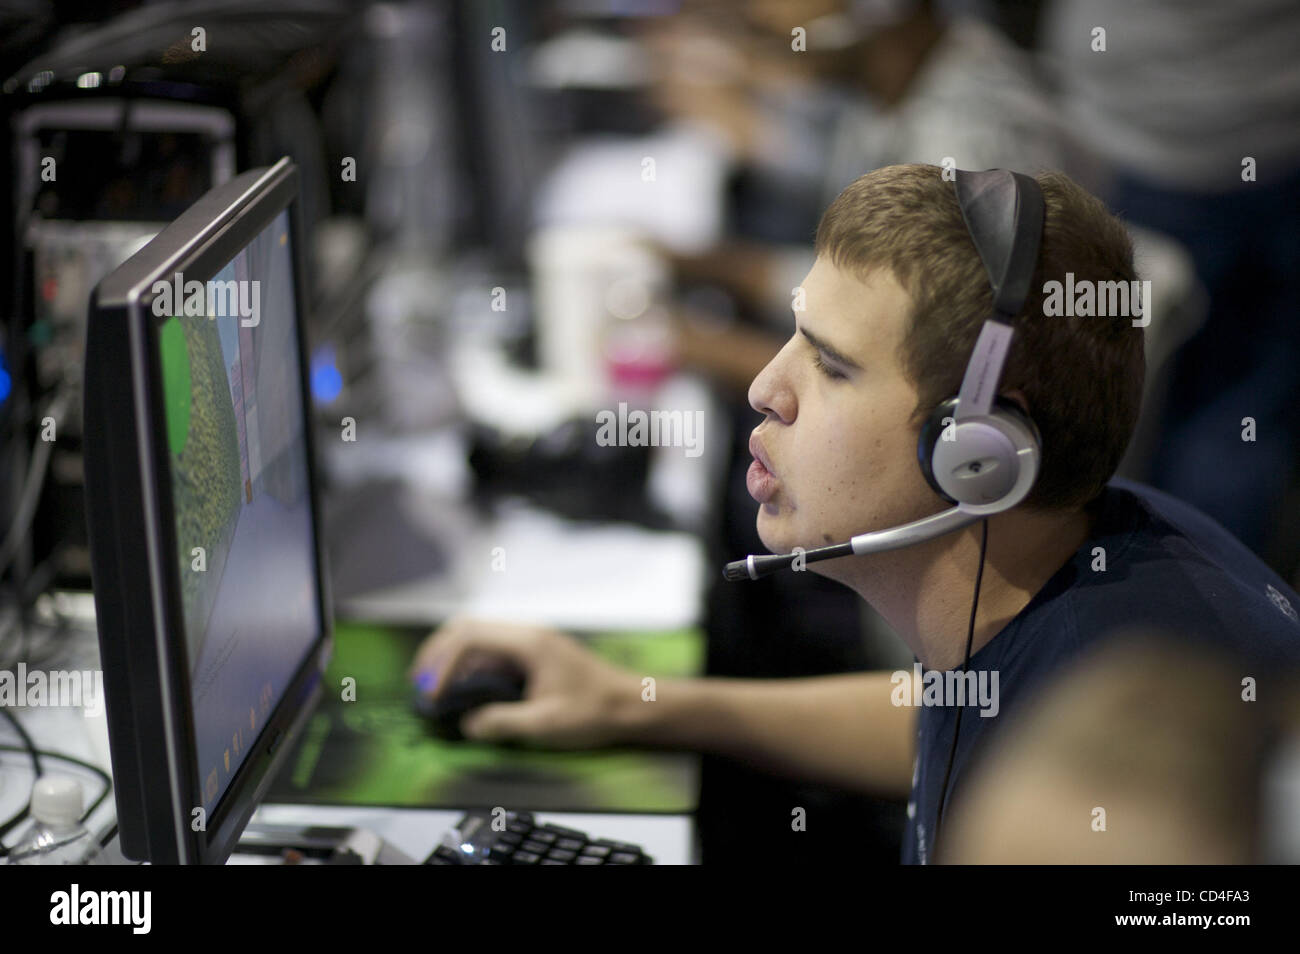 Evil Genius team competing at 'E for All' Gaming Expo held at the Los Angeles Convention Center. Stock Photo